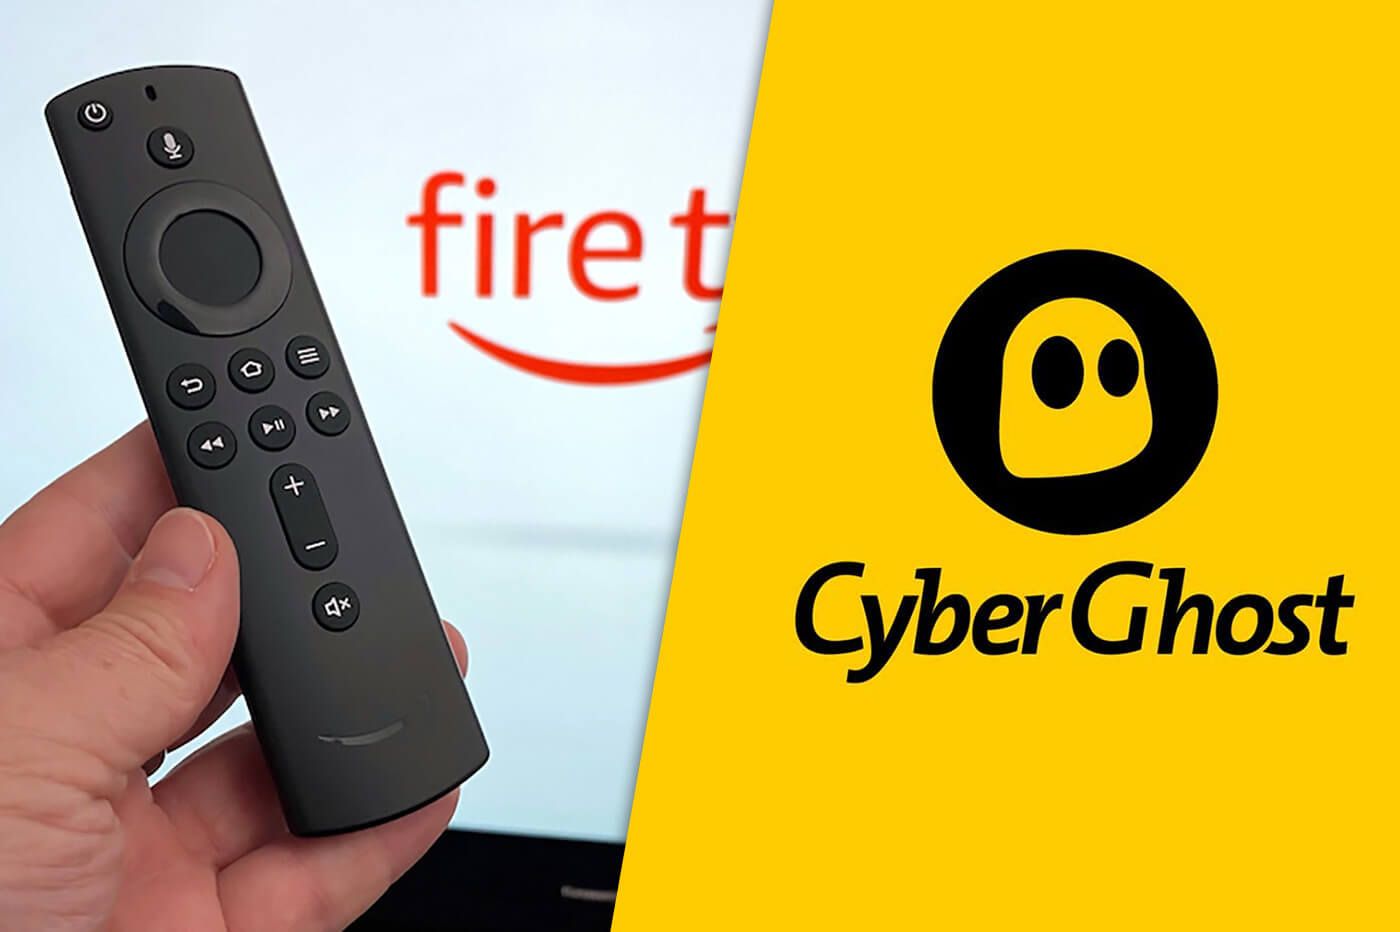 How to Install a VPN on  Firestick TV in under 1 minute